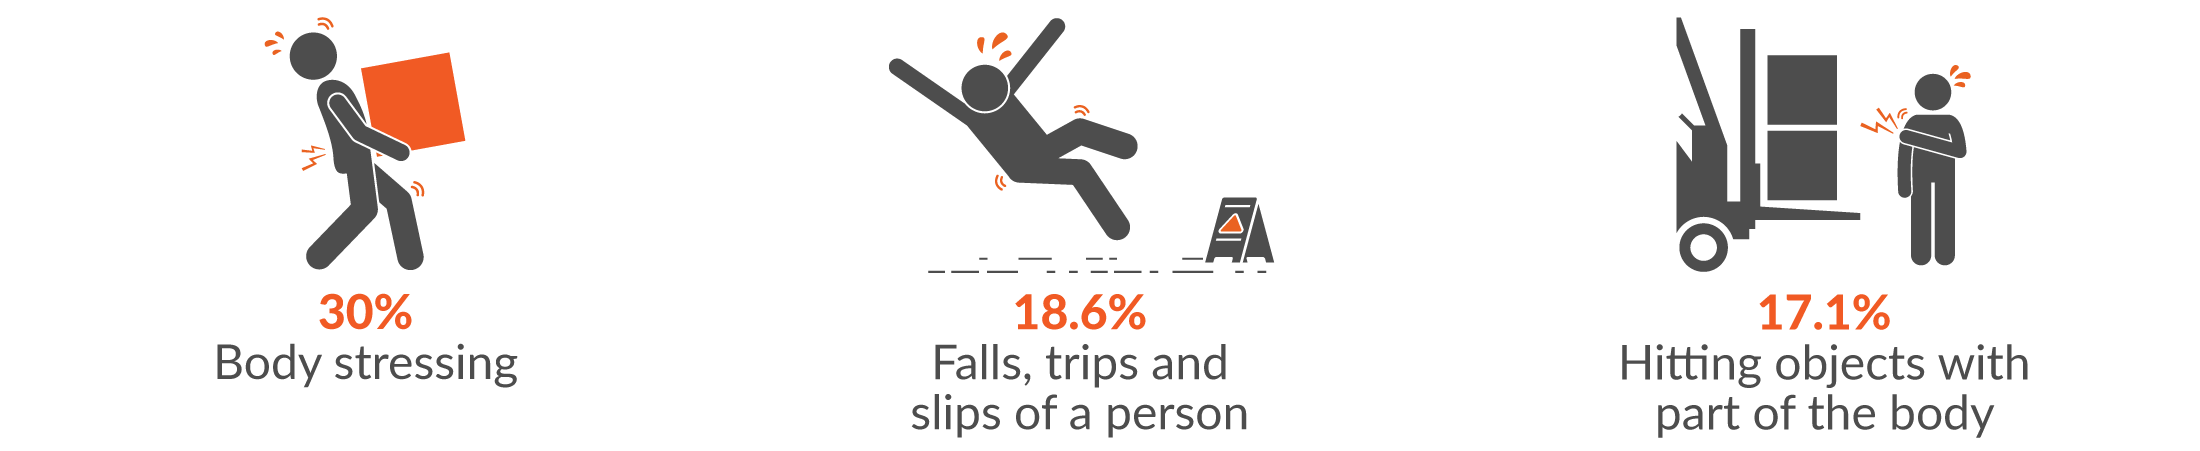 This infographic shows the main three mechanisms of serious injury for Retail trade claims were 30% body stressing; 18.6% falls, trips and slips of a person; and 17.1% hitting objects with part of the body.